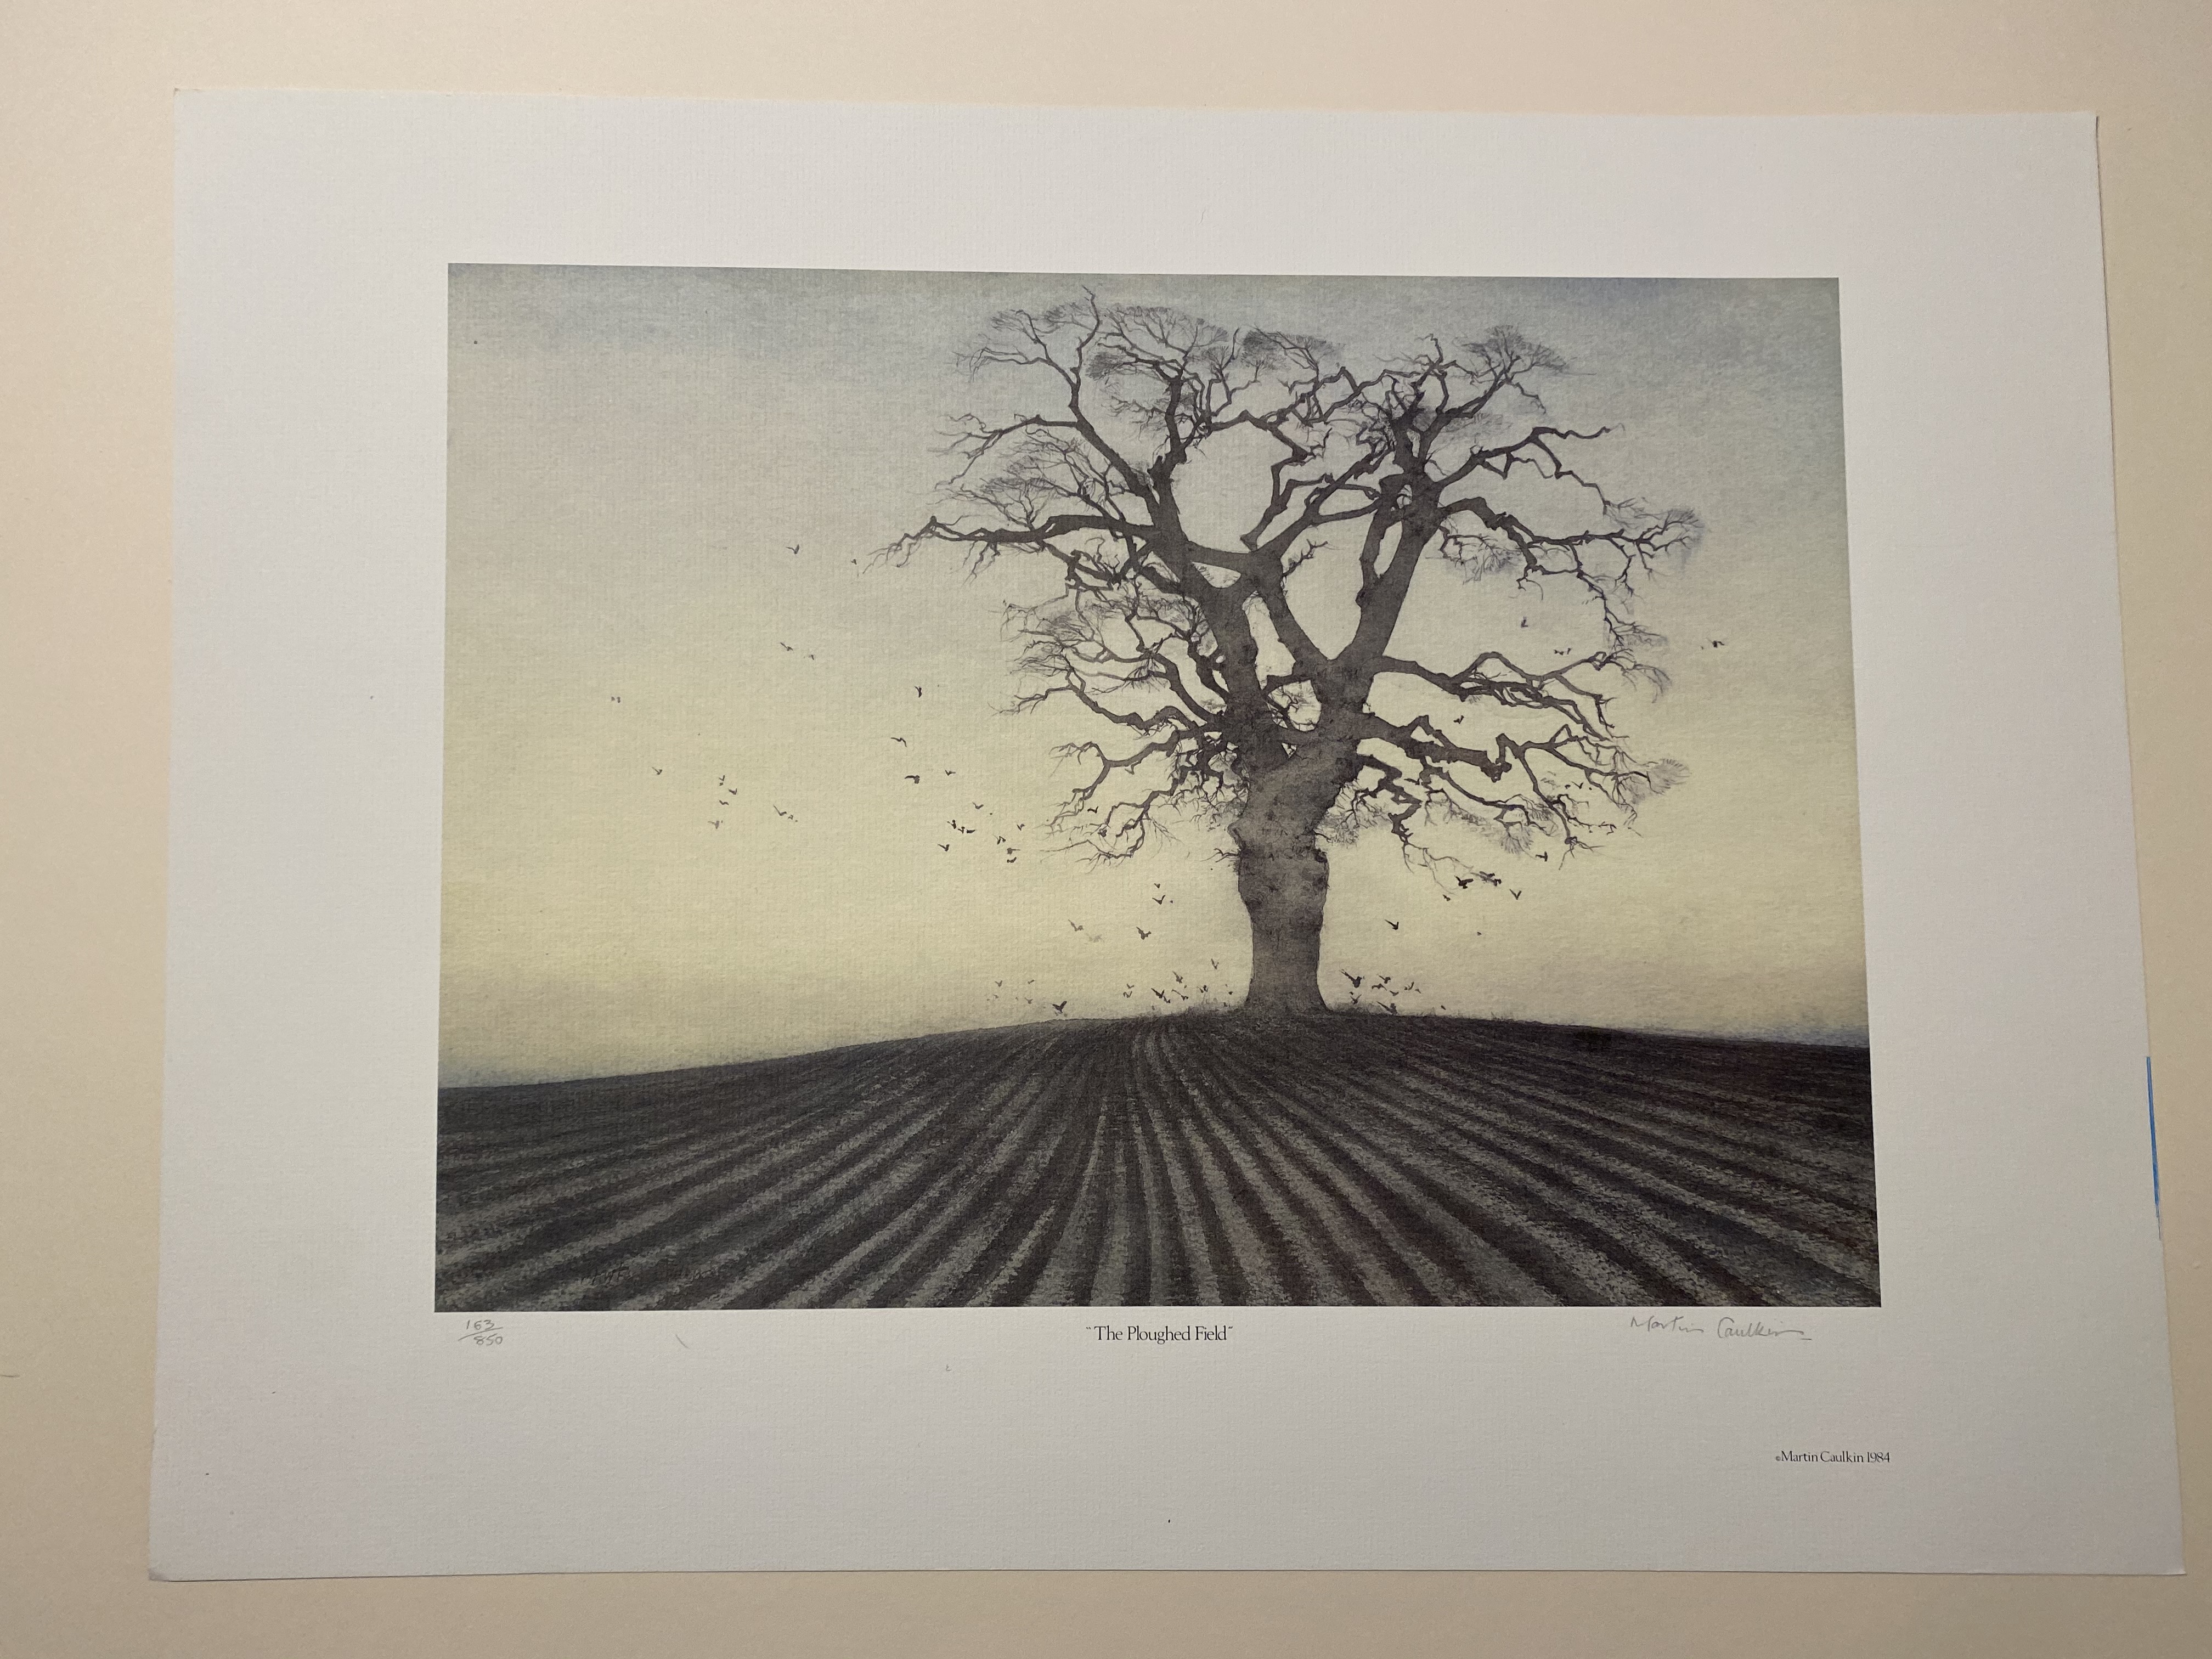 Martin Caulkin Signed Limited Edition Print, The Ploughed Field 1984.